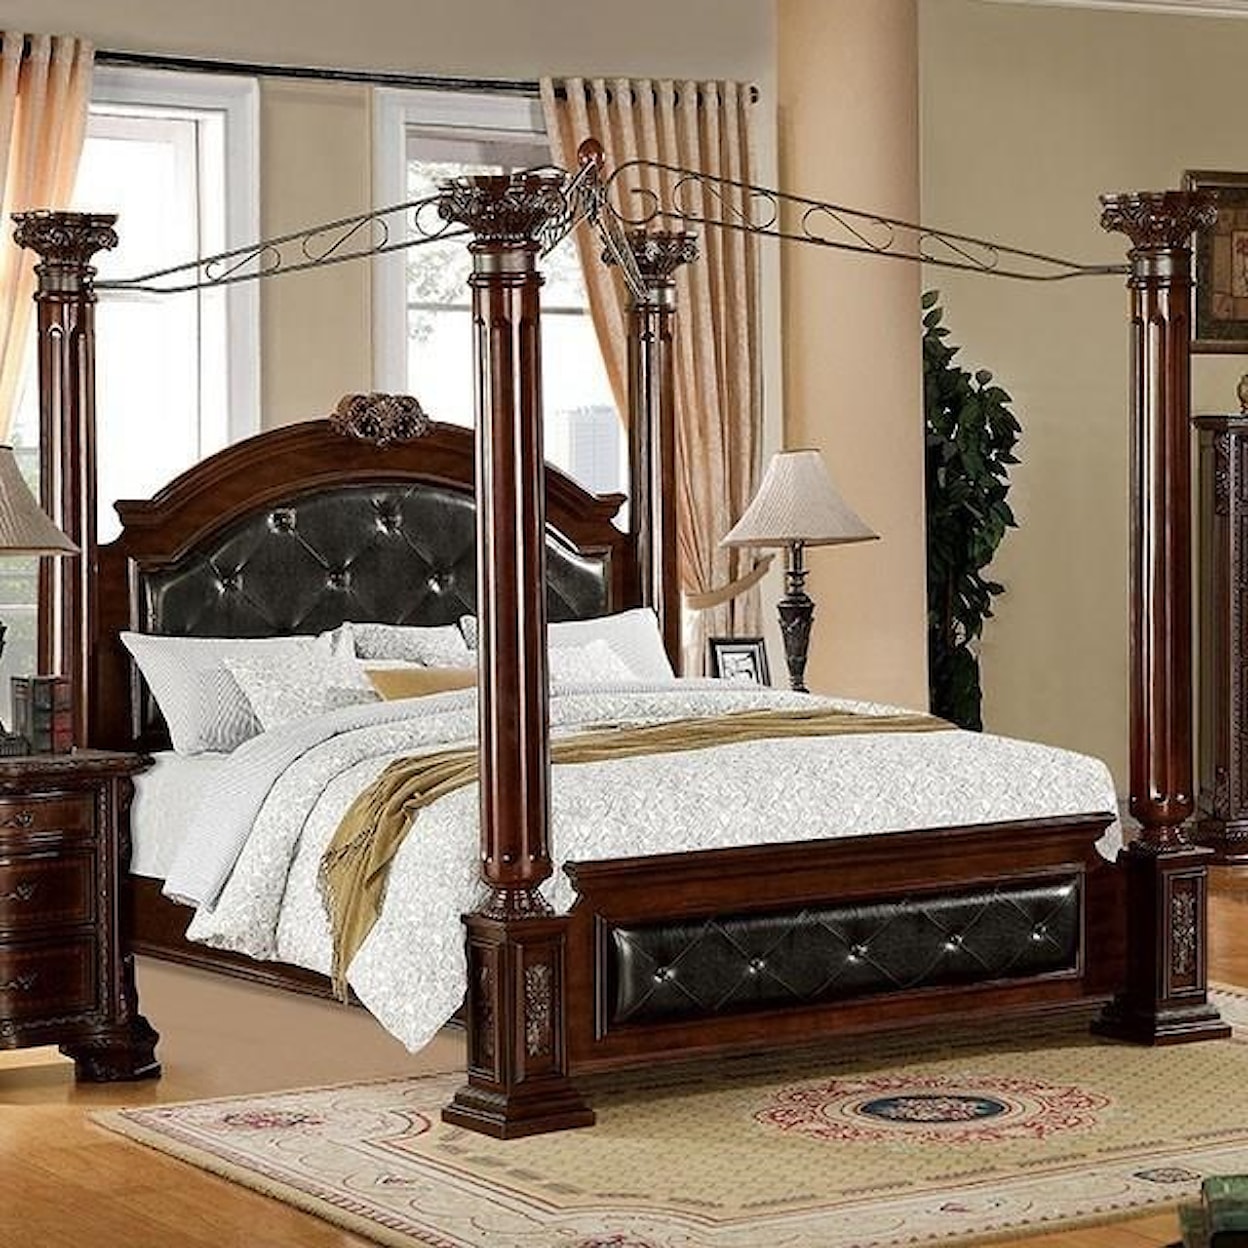 Furniture of America Mandalay Queen Canopy Bed